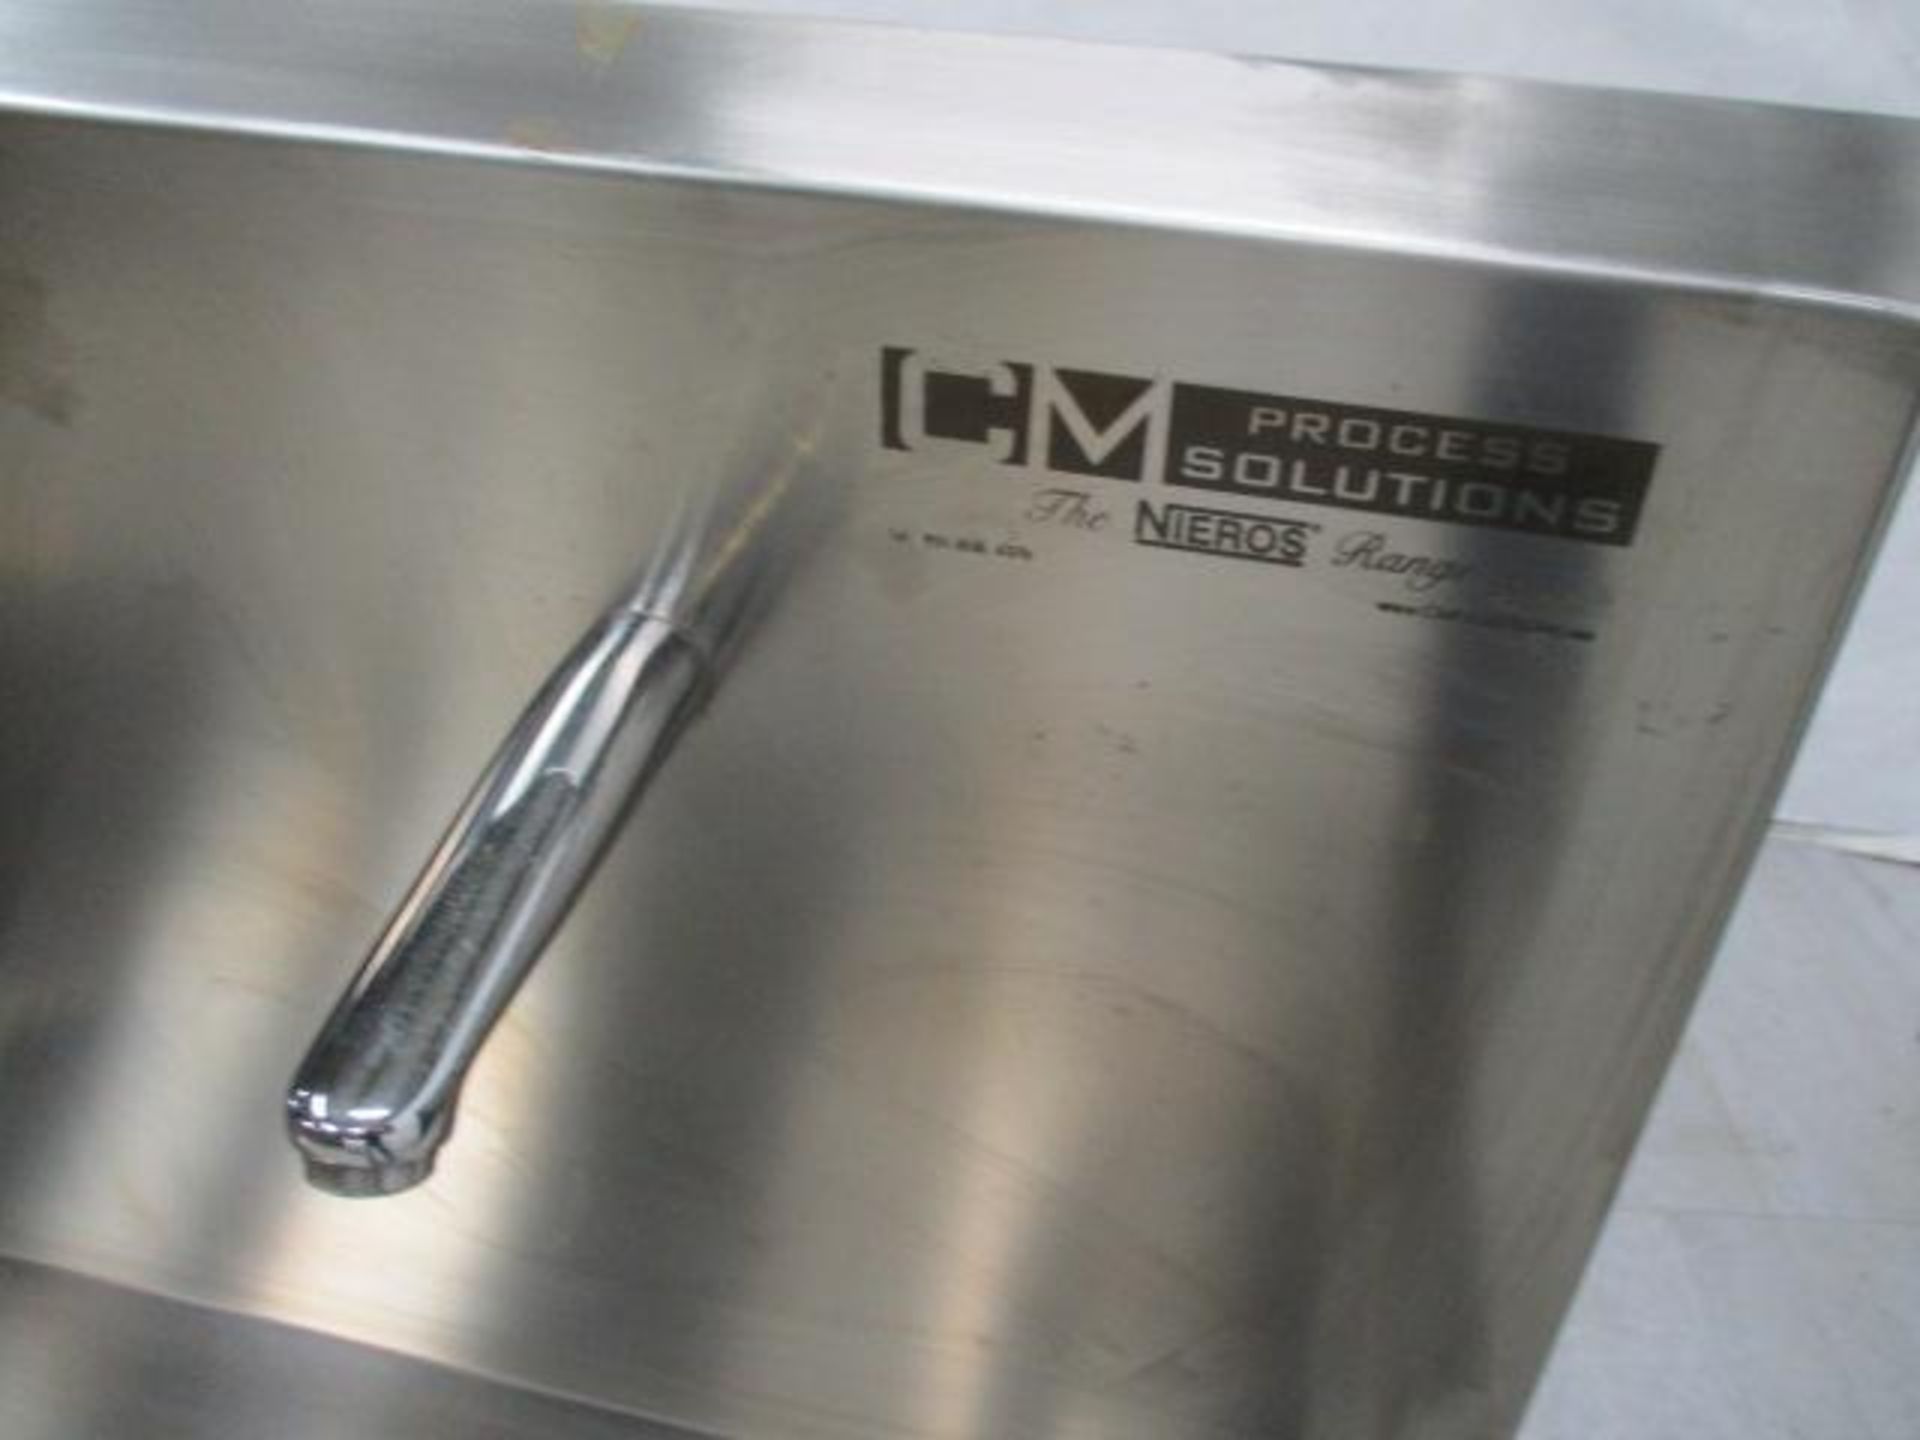 Stainless steel sink - Image 4 of 6